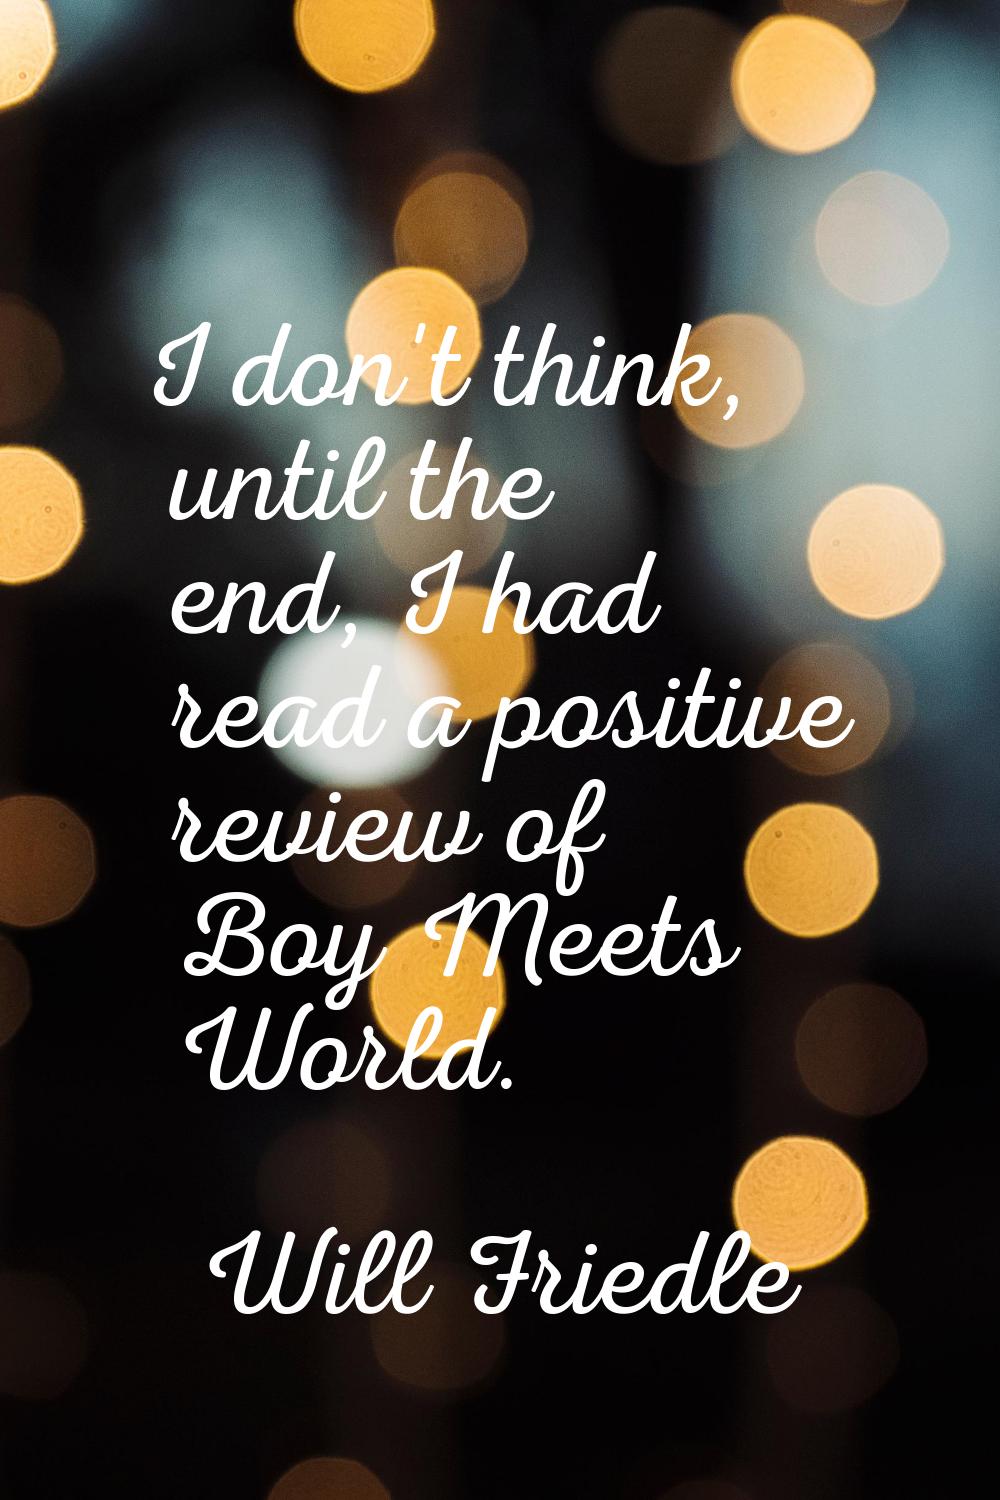 I don't think, until the end, I had read a positive review of Boy Meets World.